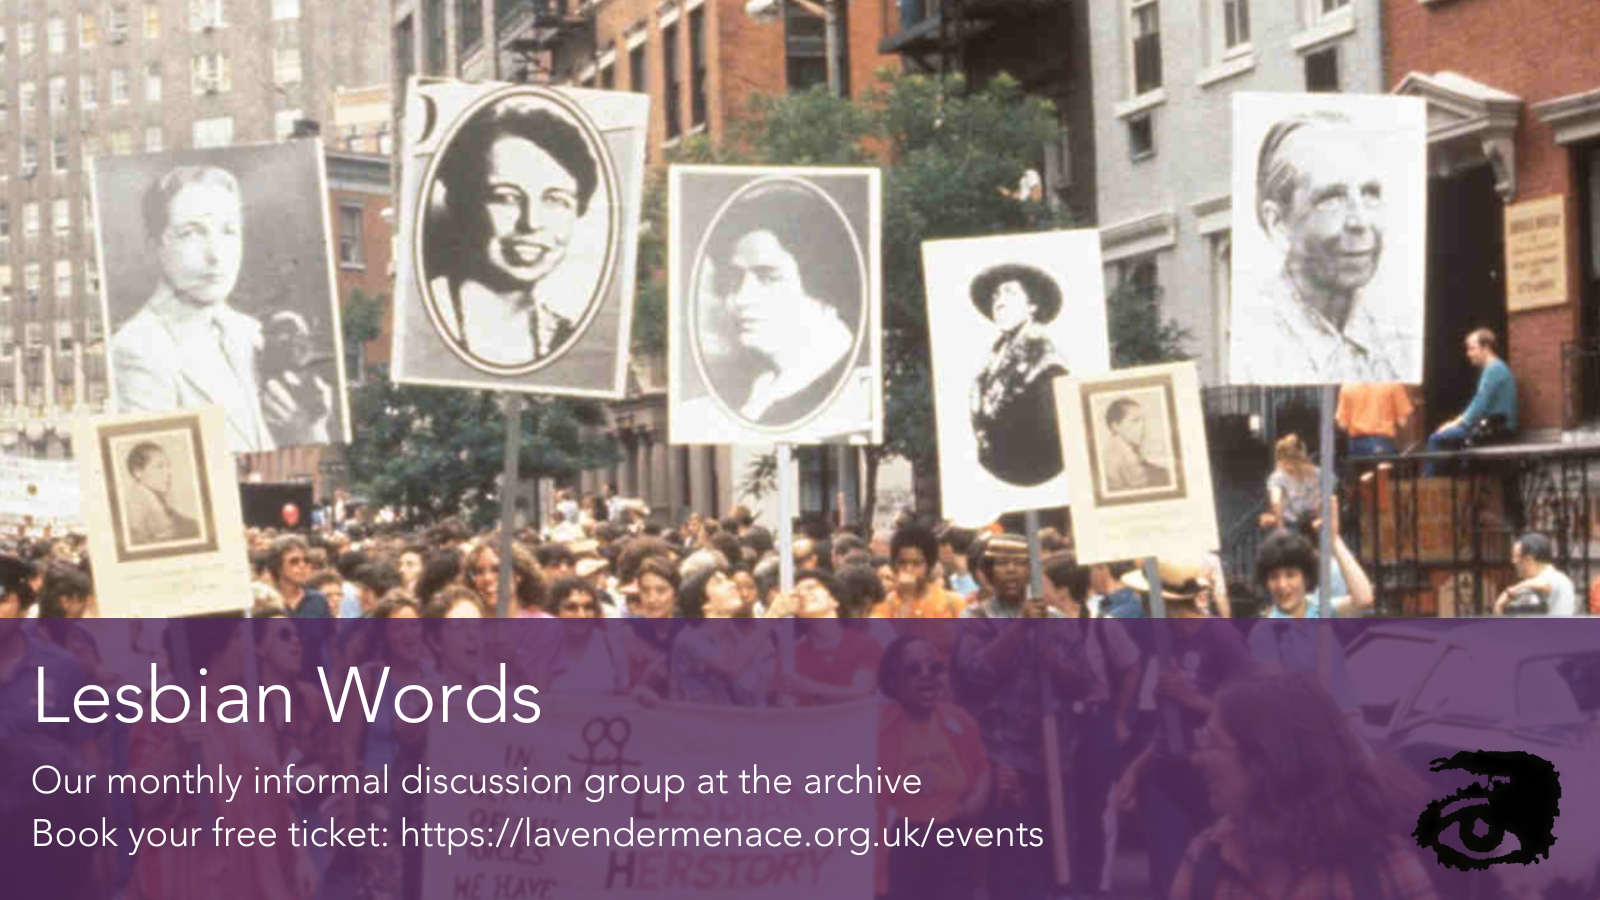 A photograph of a crowd of lesbians from the Lesbian Herstory Archive marching carrying banners with Mabel Hampton, Radclyffe Hall, and other lesbian icons.